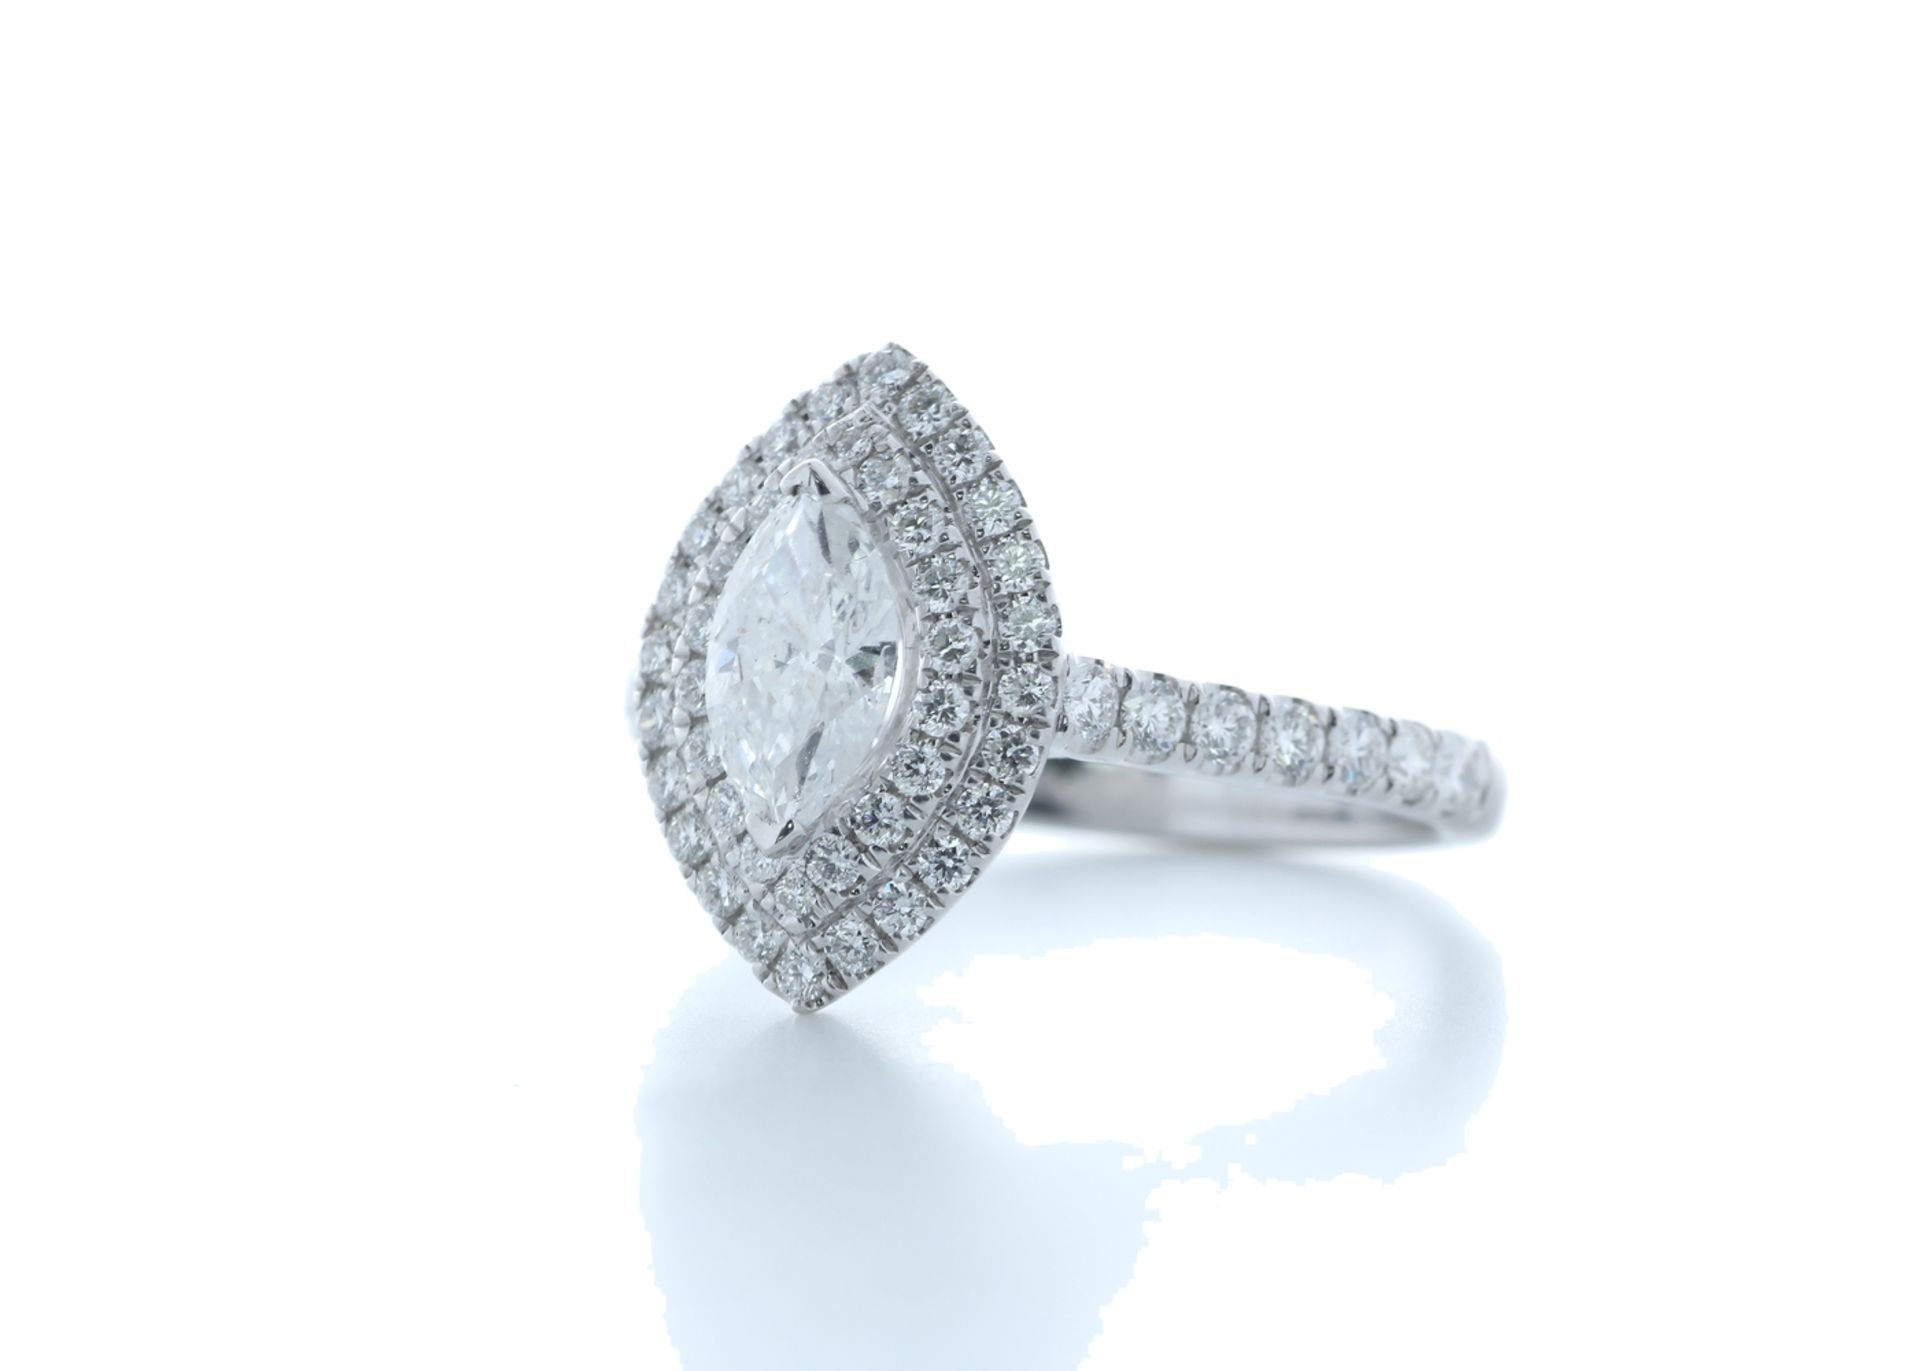 18ct White Gold Marquise Diamond Halo Ring 1.15 (0.52) Carats - Valued by IDI £7,250.00 - 18ct White - Image 2 of 5